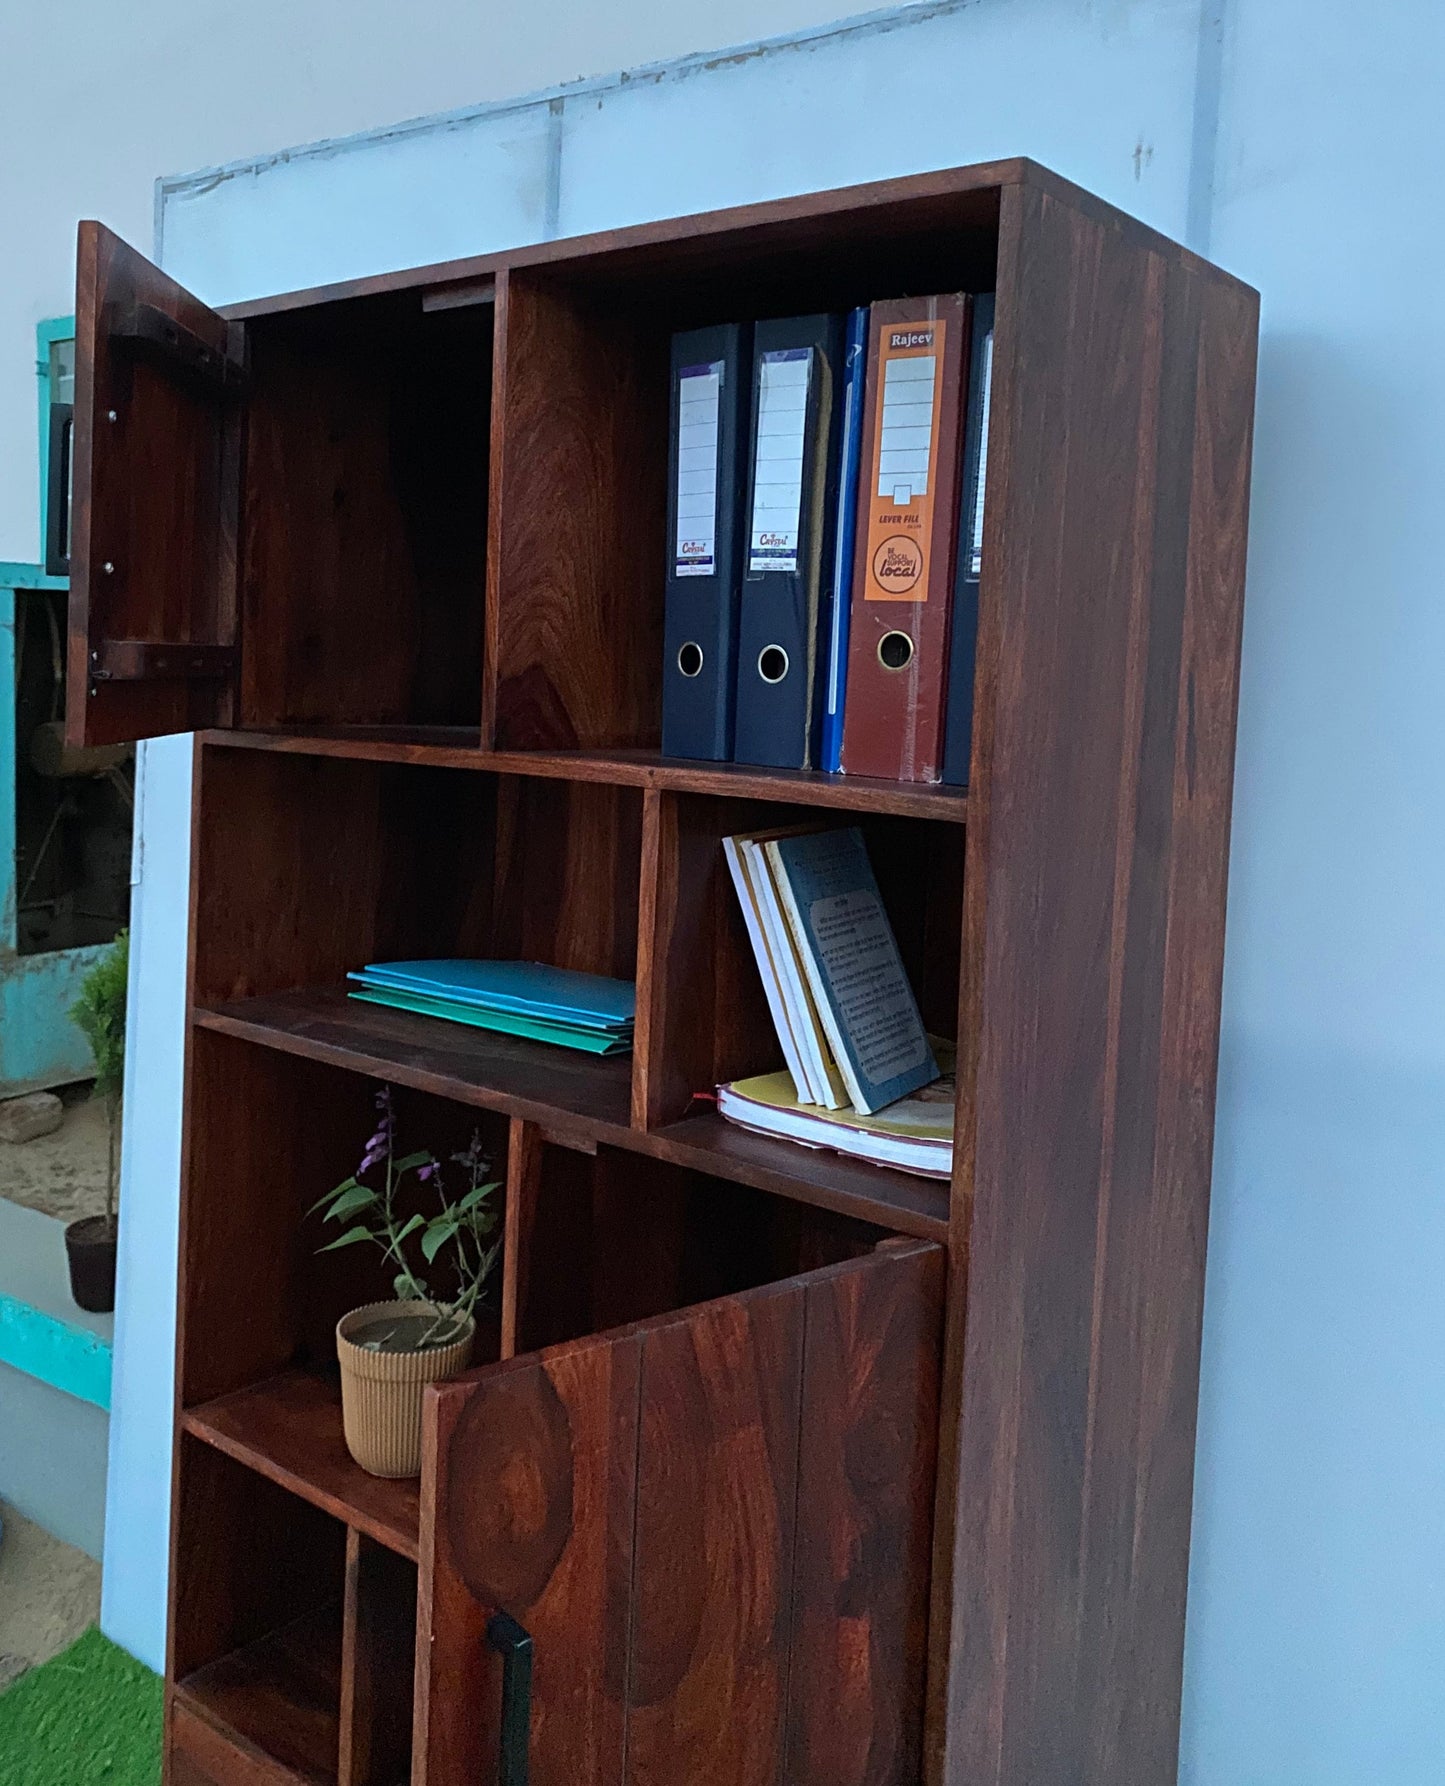 Bookshelf with two doors and two drawers made of solid sheesham wood